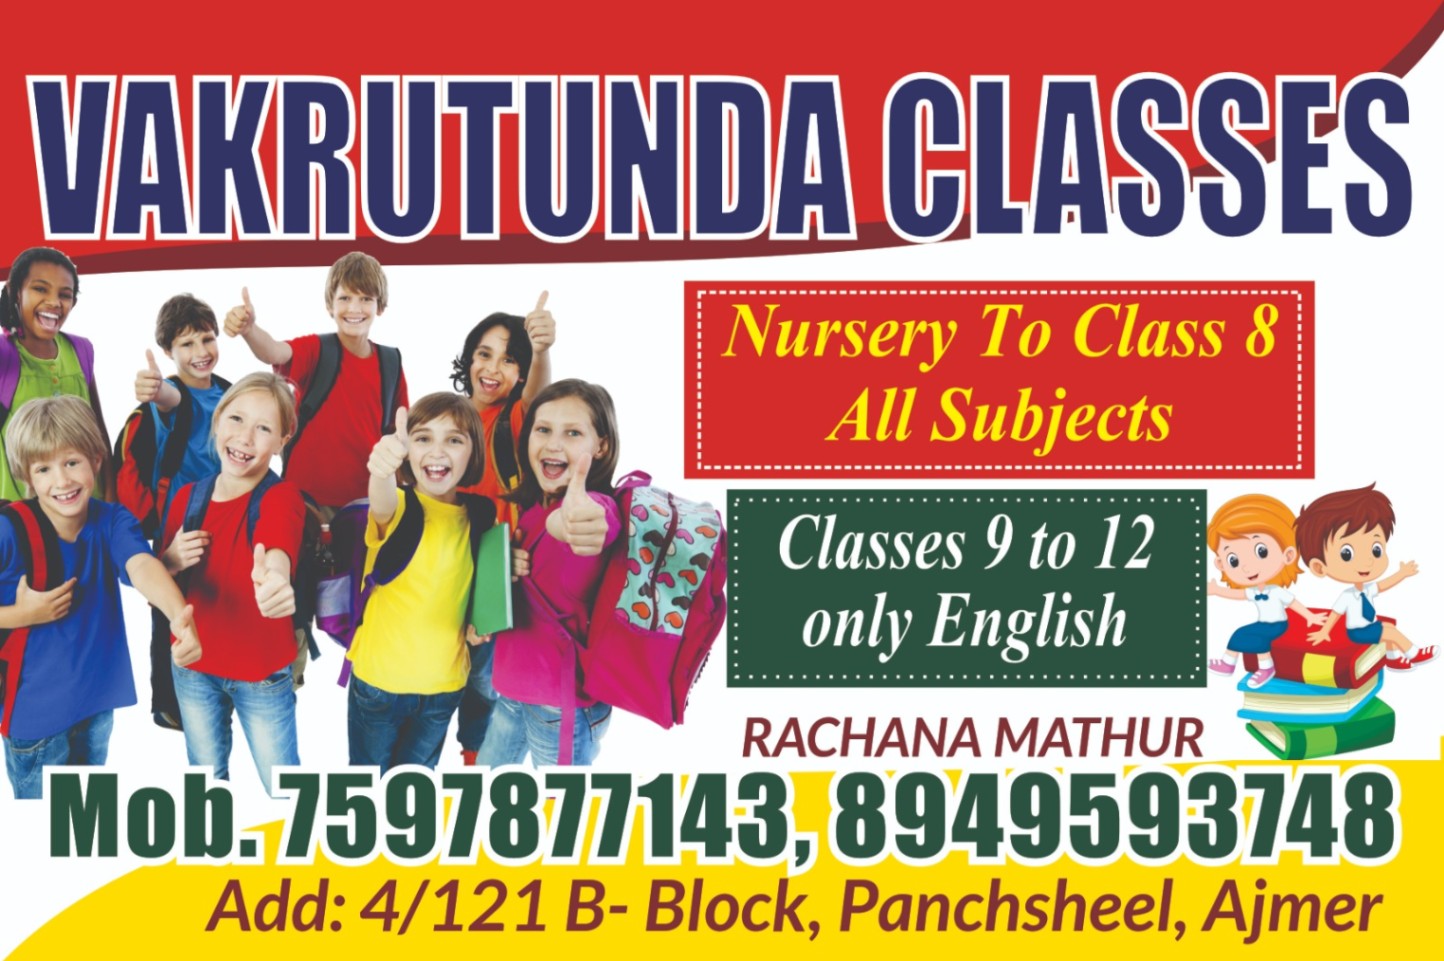 Class 11th/ 12th Tuition, Class 9th/ 10th Tuition, English; Exp: More than 15 year